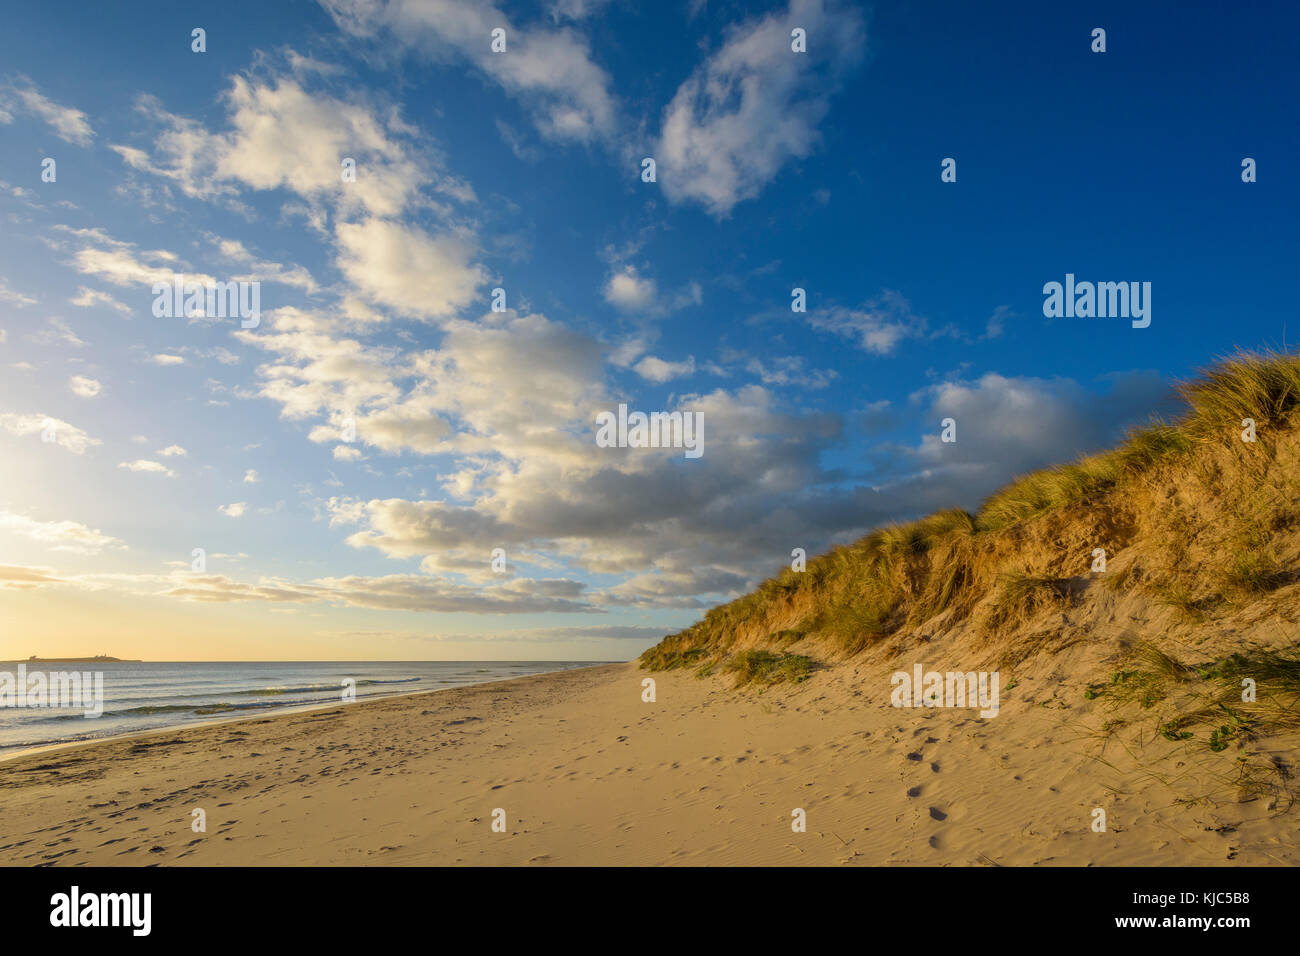 Footprints in the sand along the beach with the North Sea at Bamburgh in Northumberland, England, United Kingdom Stock Photo